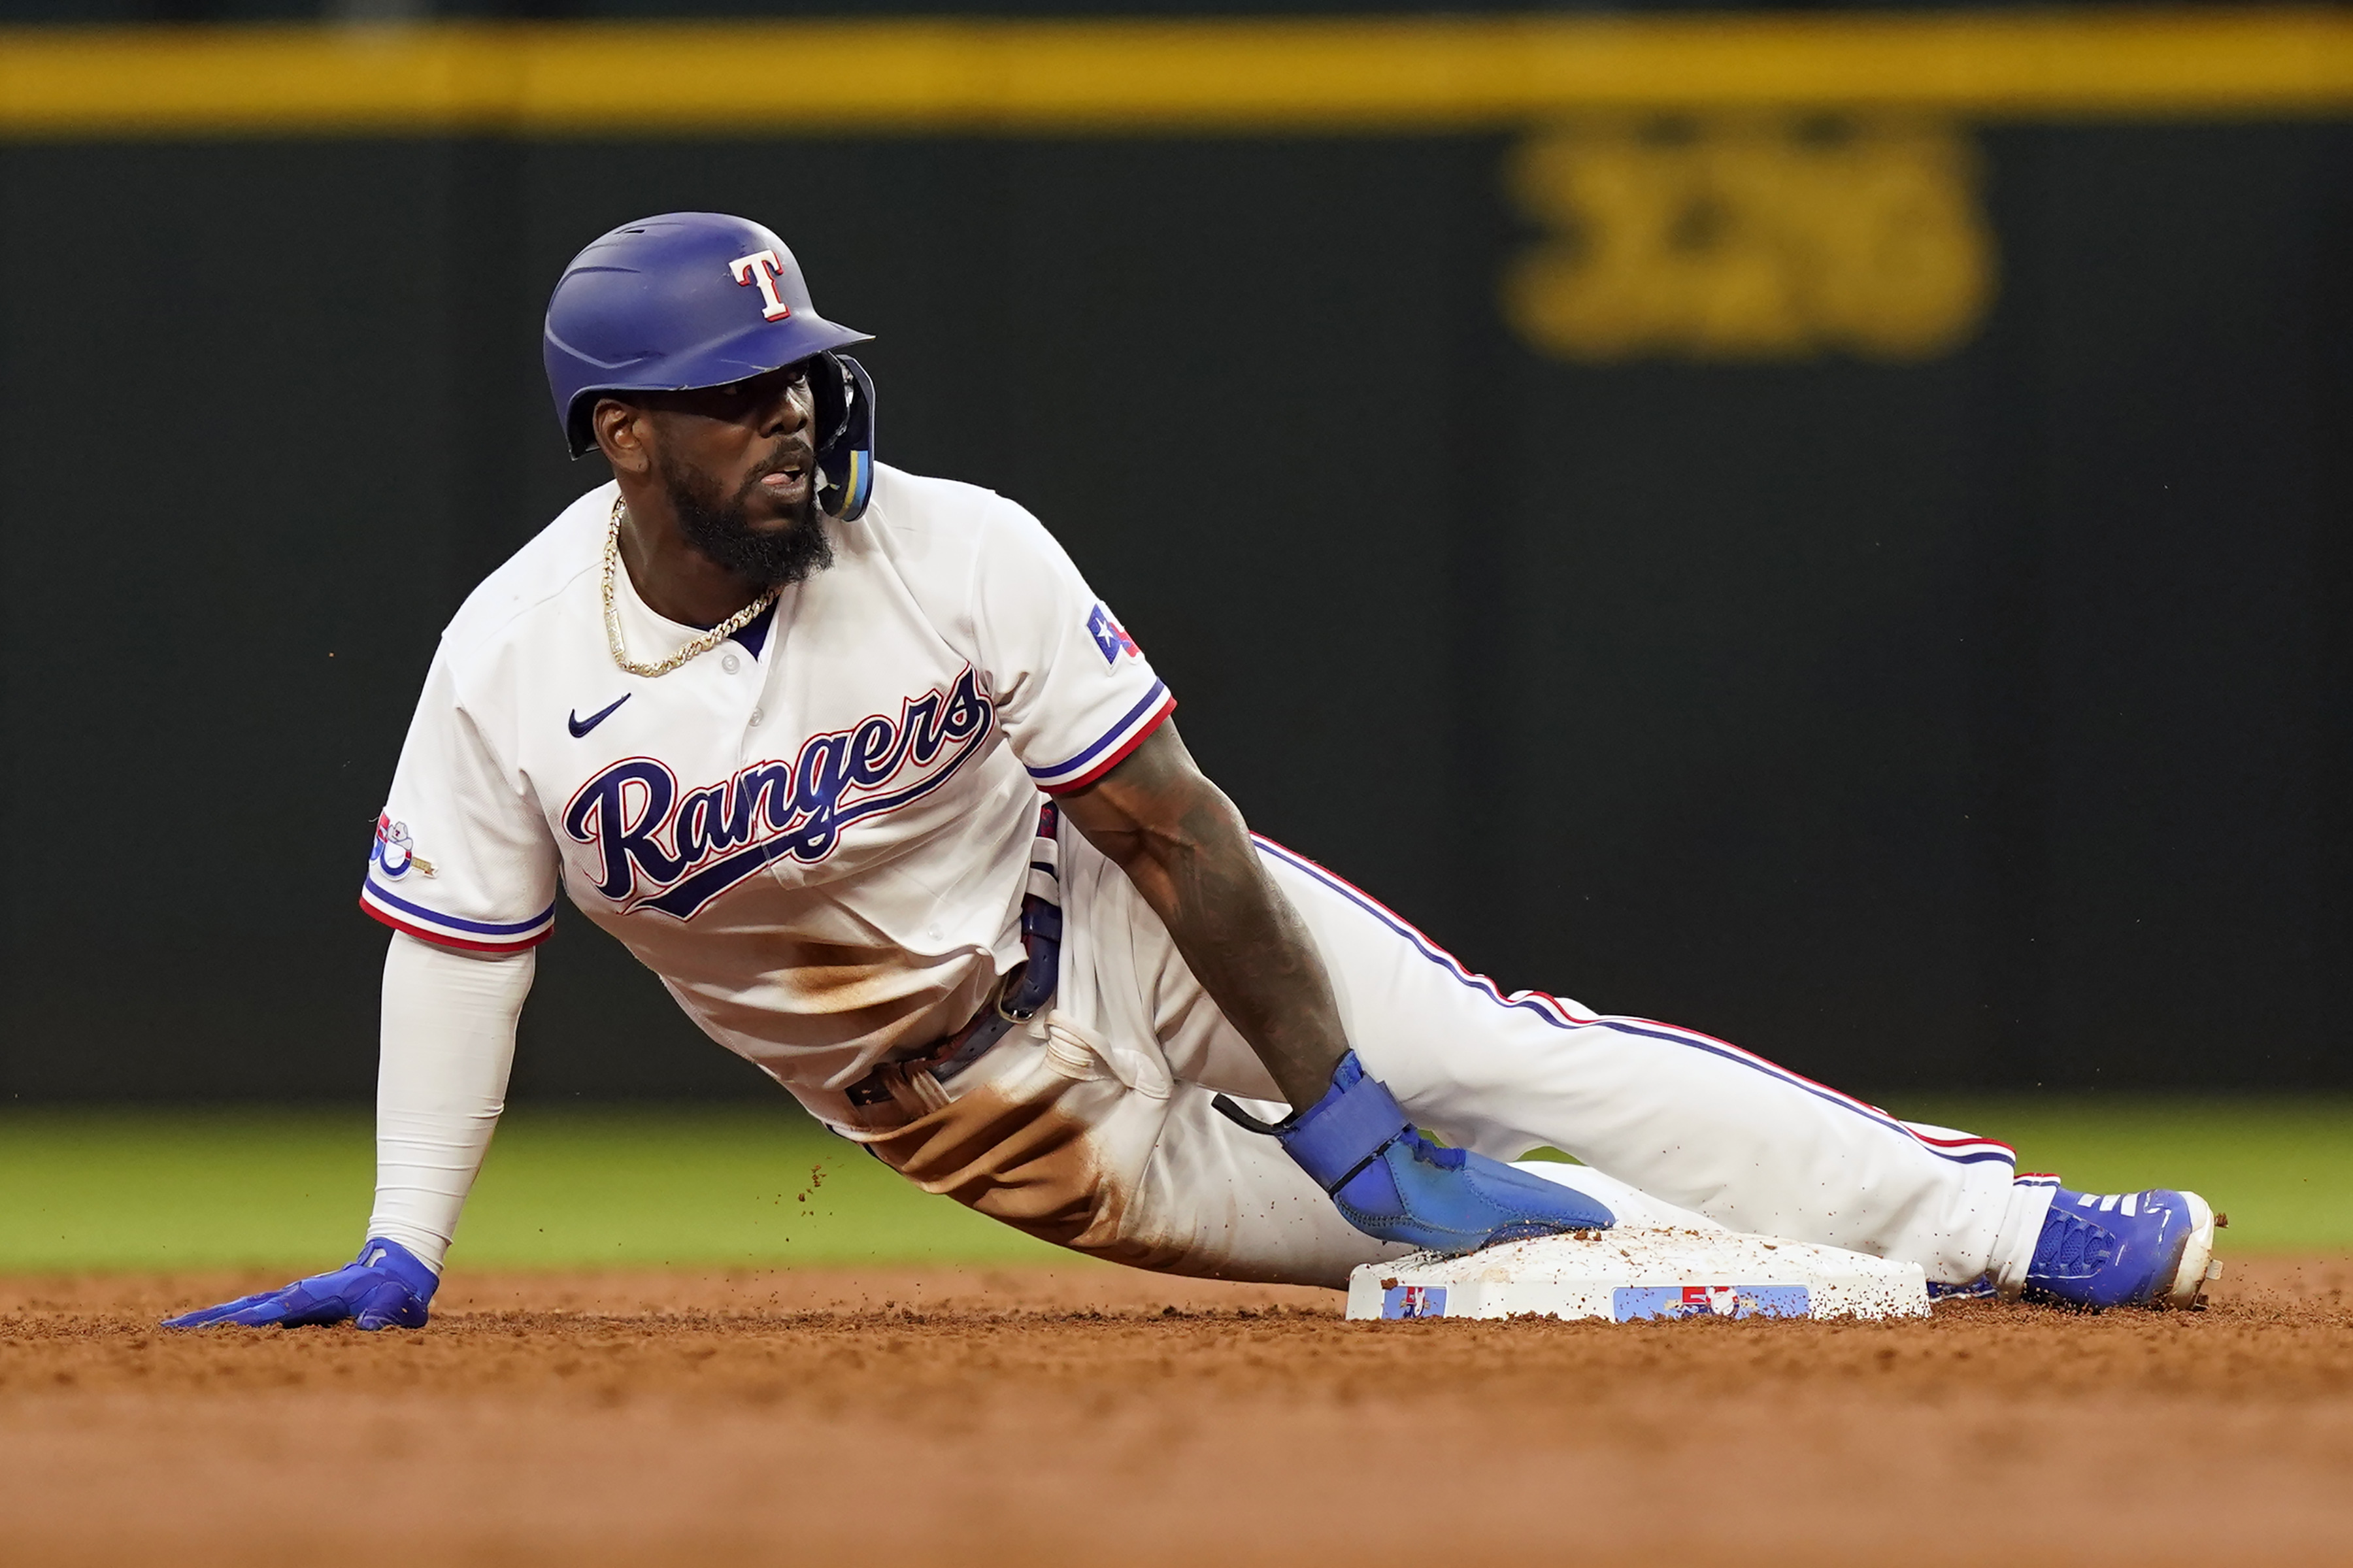 Rangers build big early lead off Valdez, hold on for 5-4 win over Astros to  take 2-0 lead in ALCS –